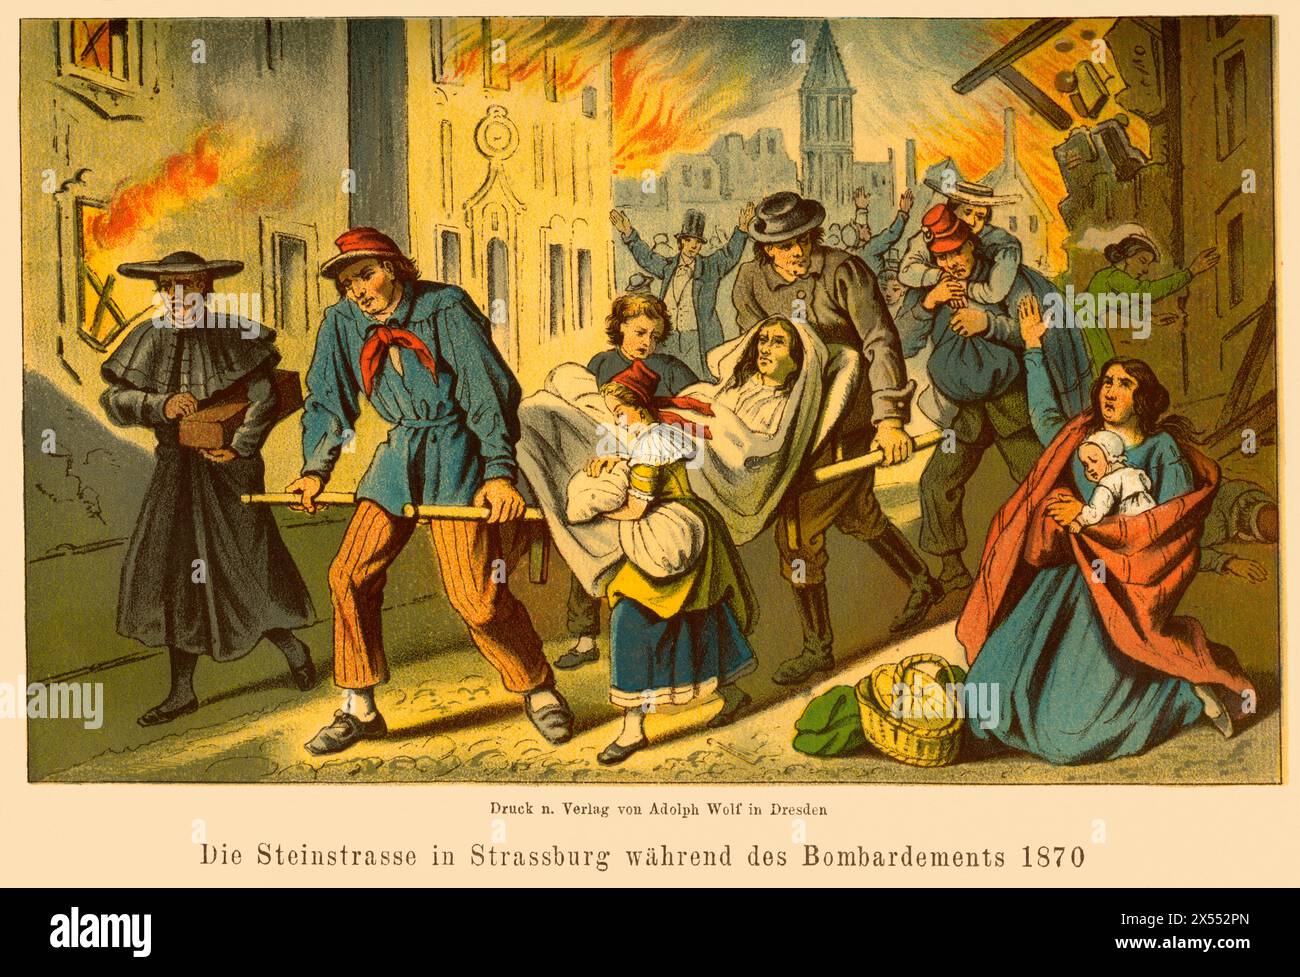 events, Strasbourg, Franco-Prussion war, 1870-1871, ARTIST'S COPYRIGHT HAS NOT TO BE CLEARED Stock Photo